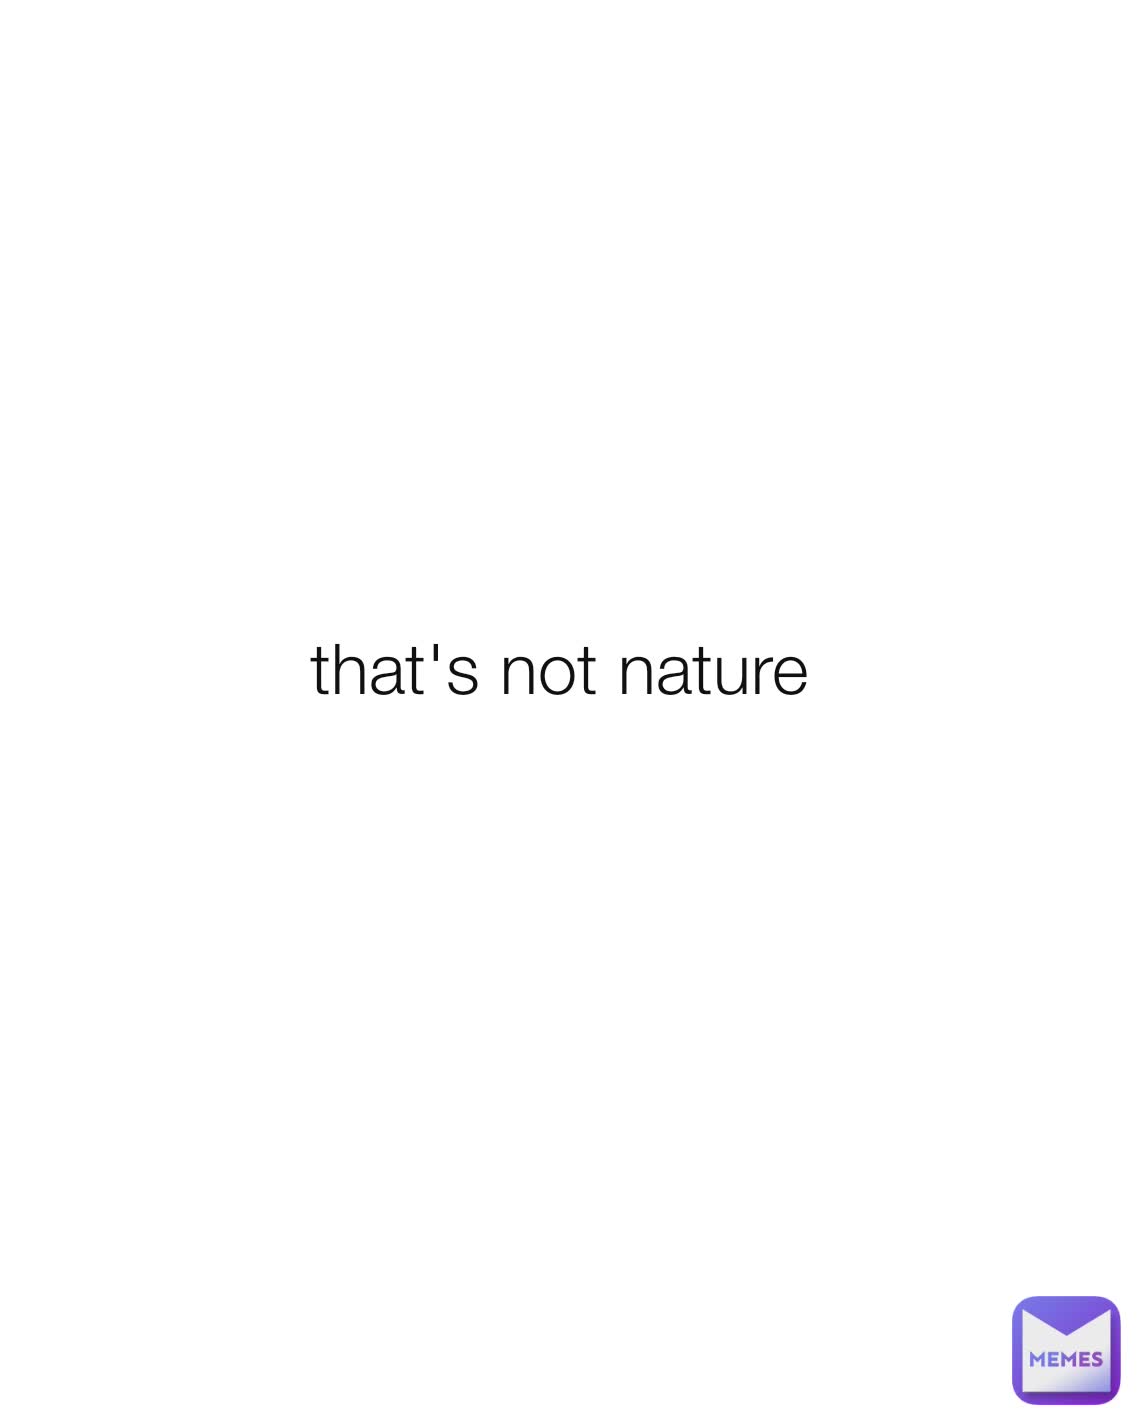 
that's not nature 

